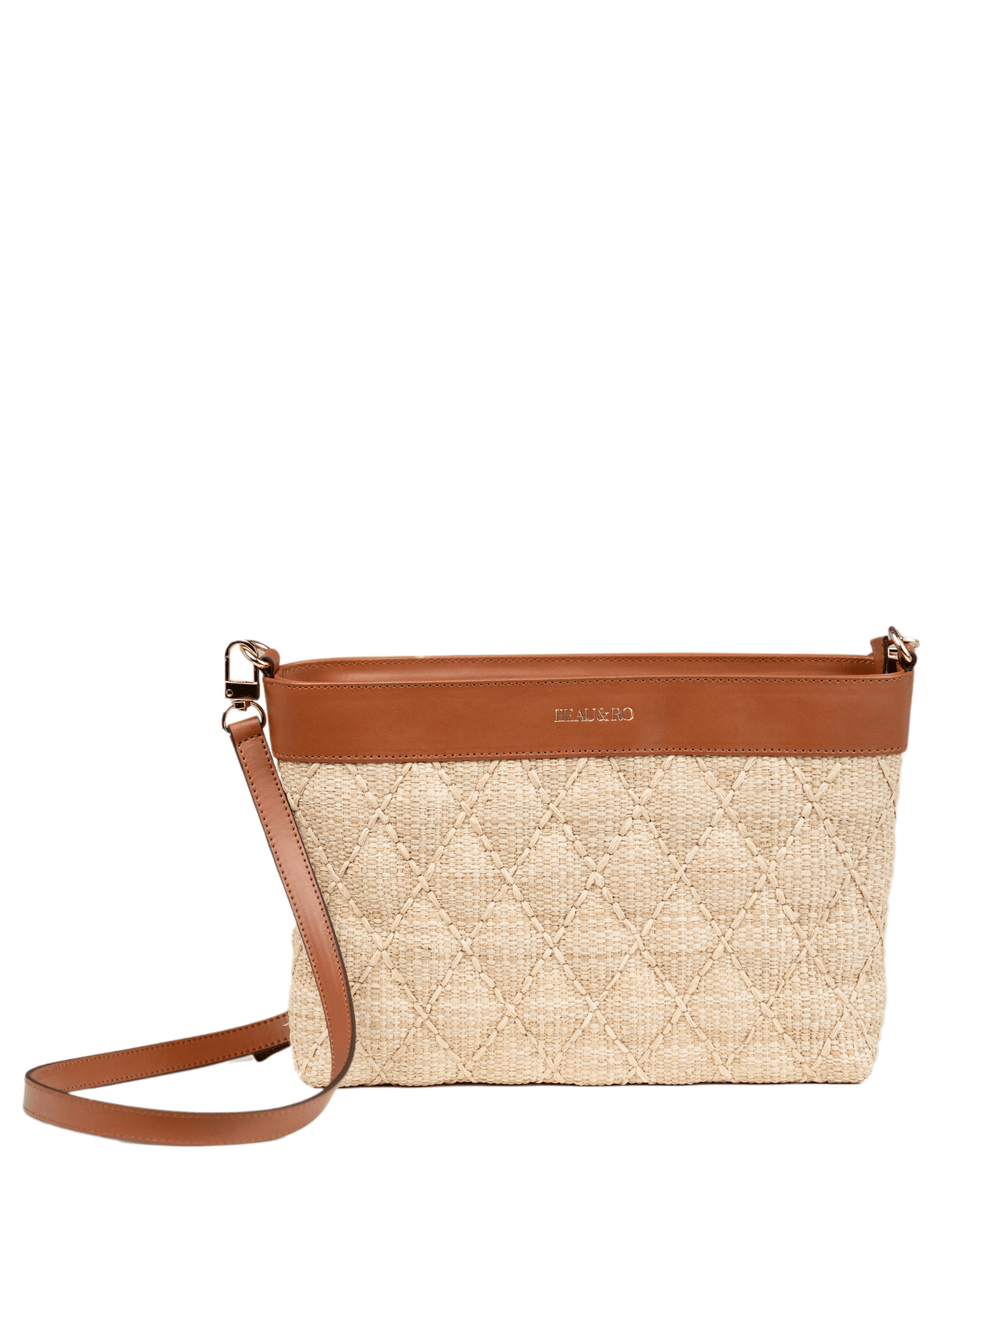 Beau & Ro Clutches Tan / OS The Maroc Collection Quilted Purse in Tan